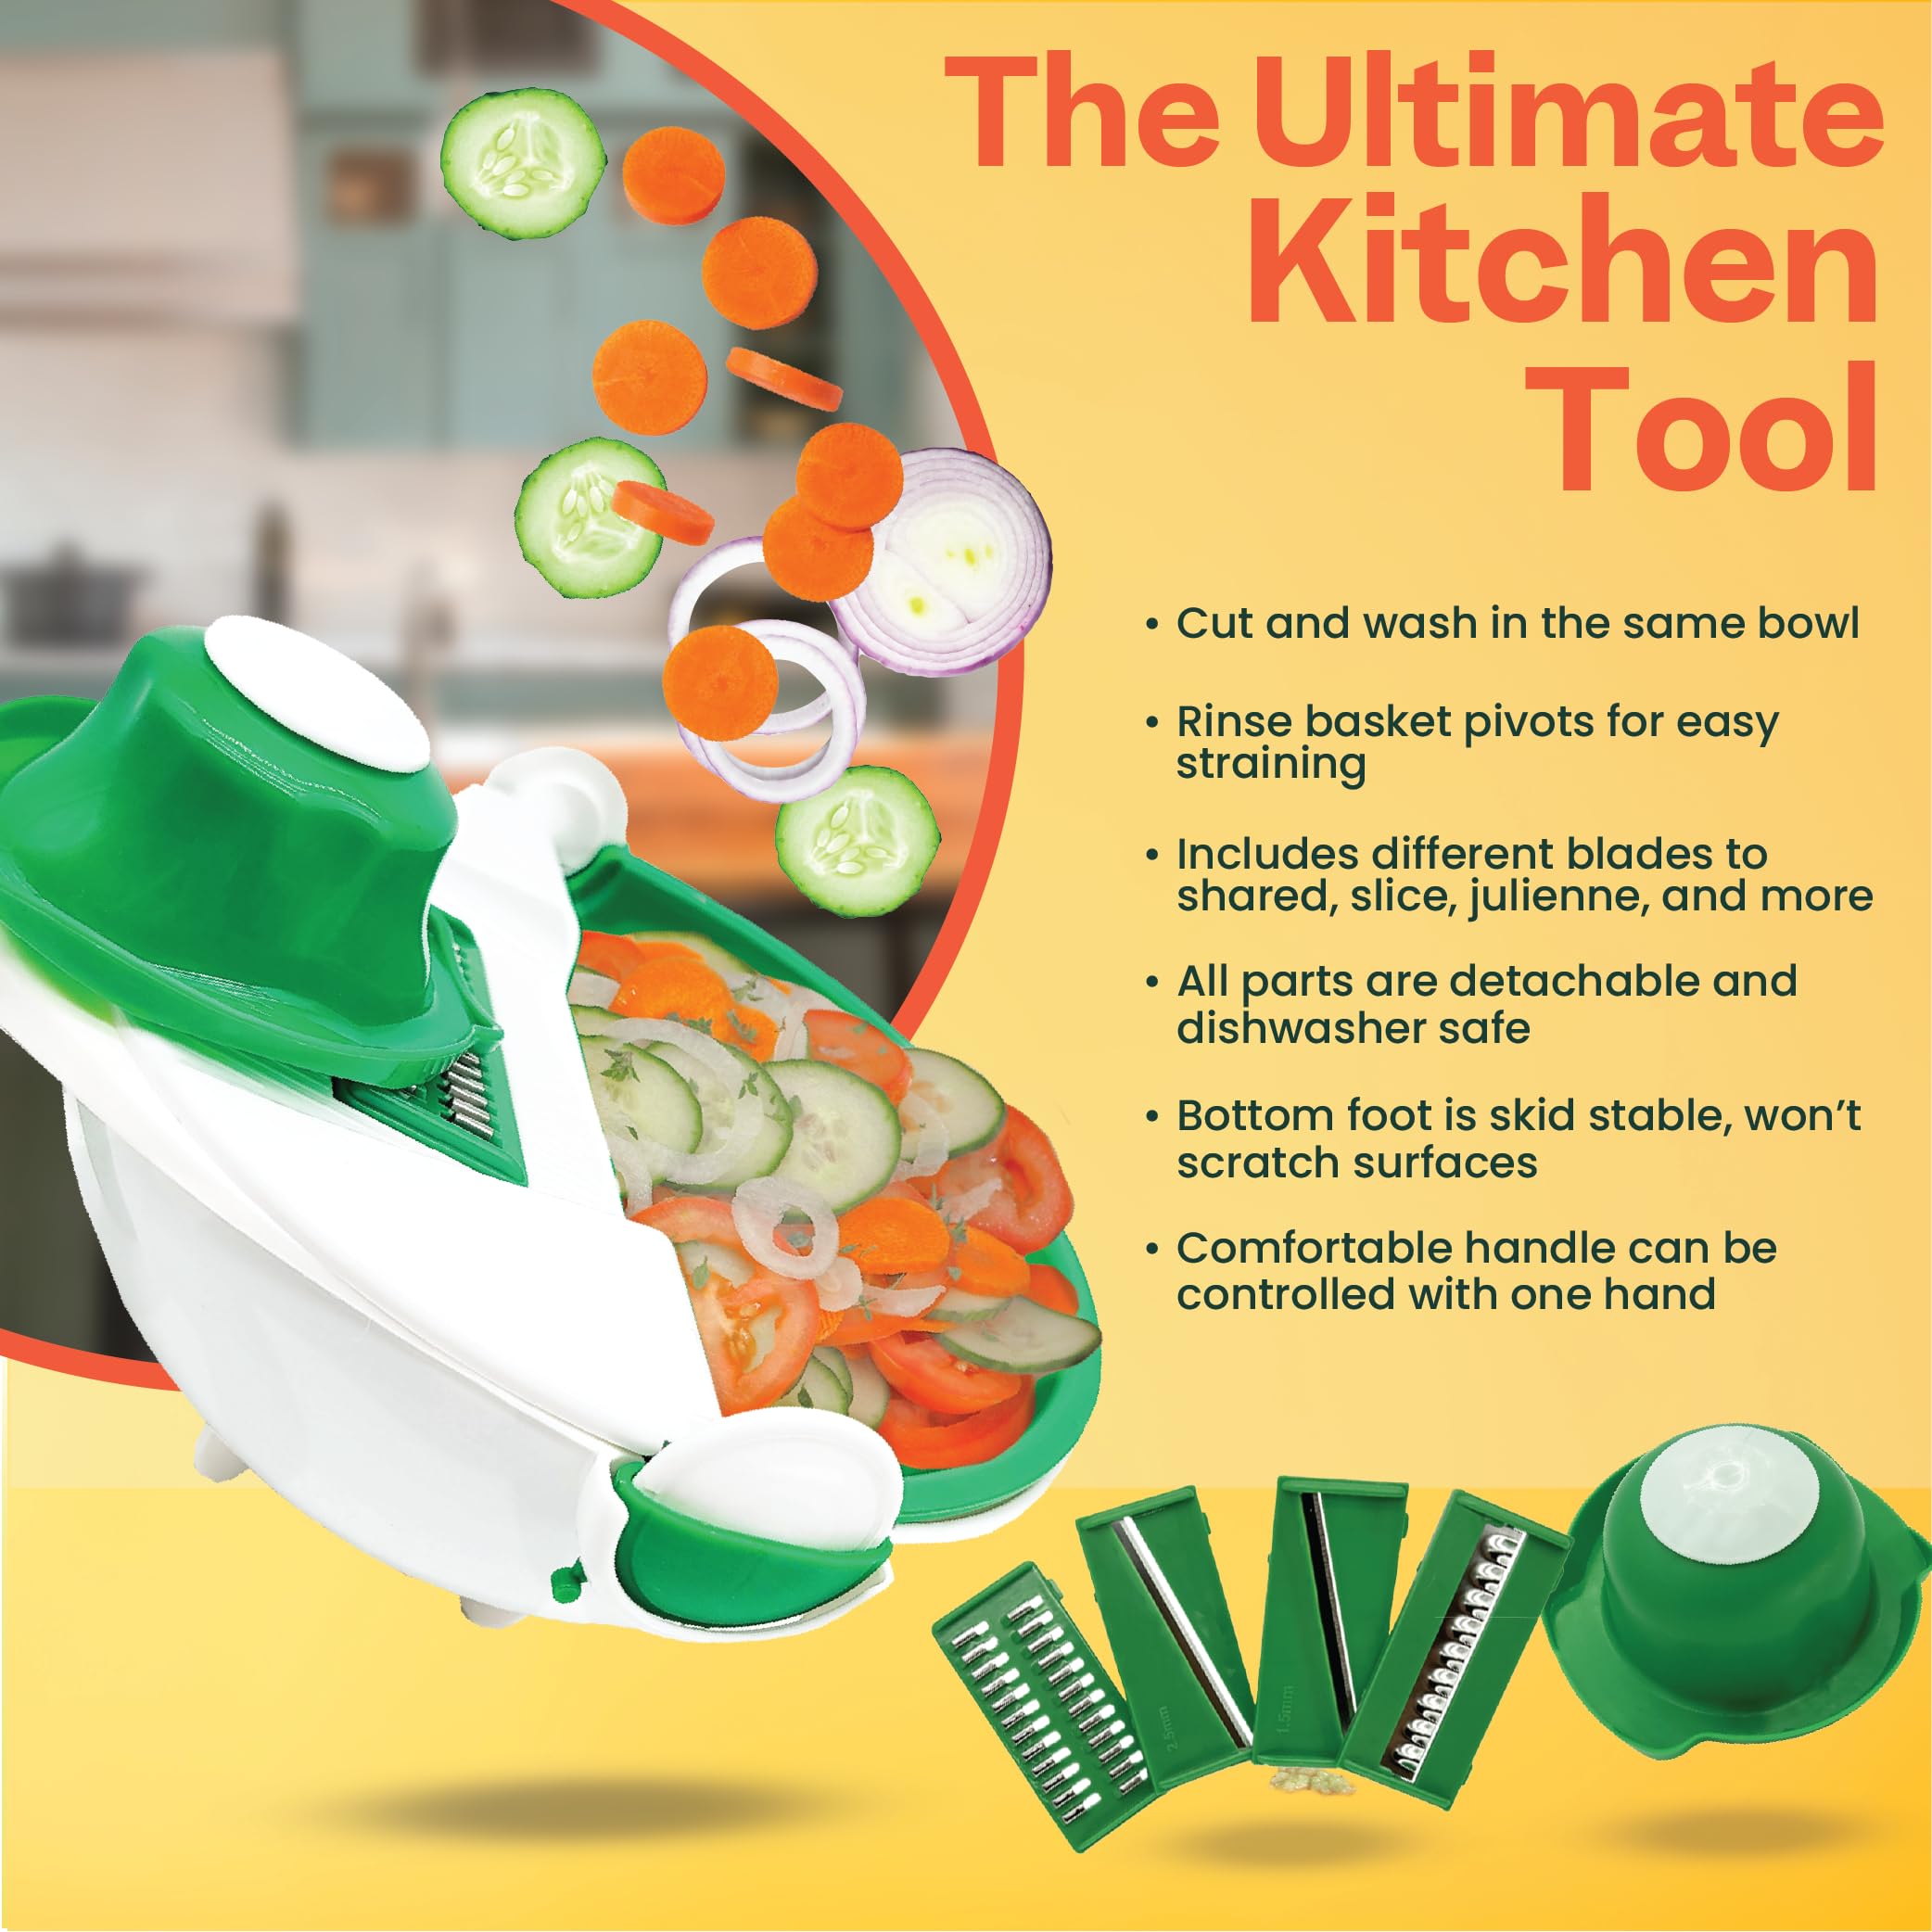 Ultimate Irish Prep Bowl - Ronnie Neville’s Original as Seen on TV Salad Preparation and Rinsing Bowl, Vegetable Slicer Salad Maker Kitchen Tools to Shred/Slice/Rinse, Kitchen Tool Salad Cutter Bowl